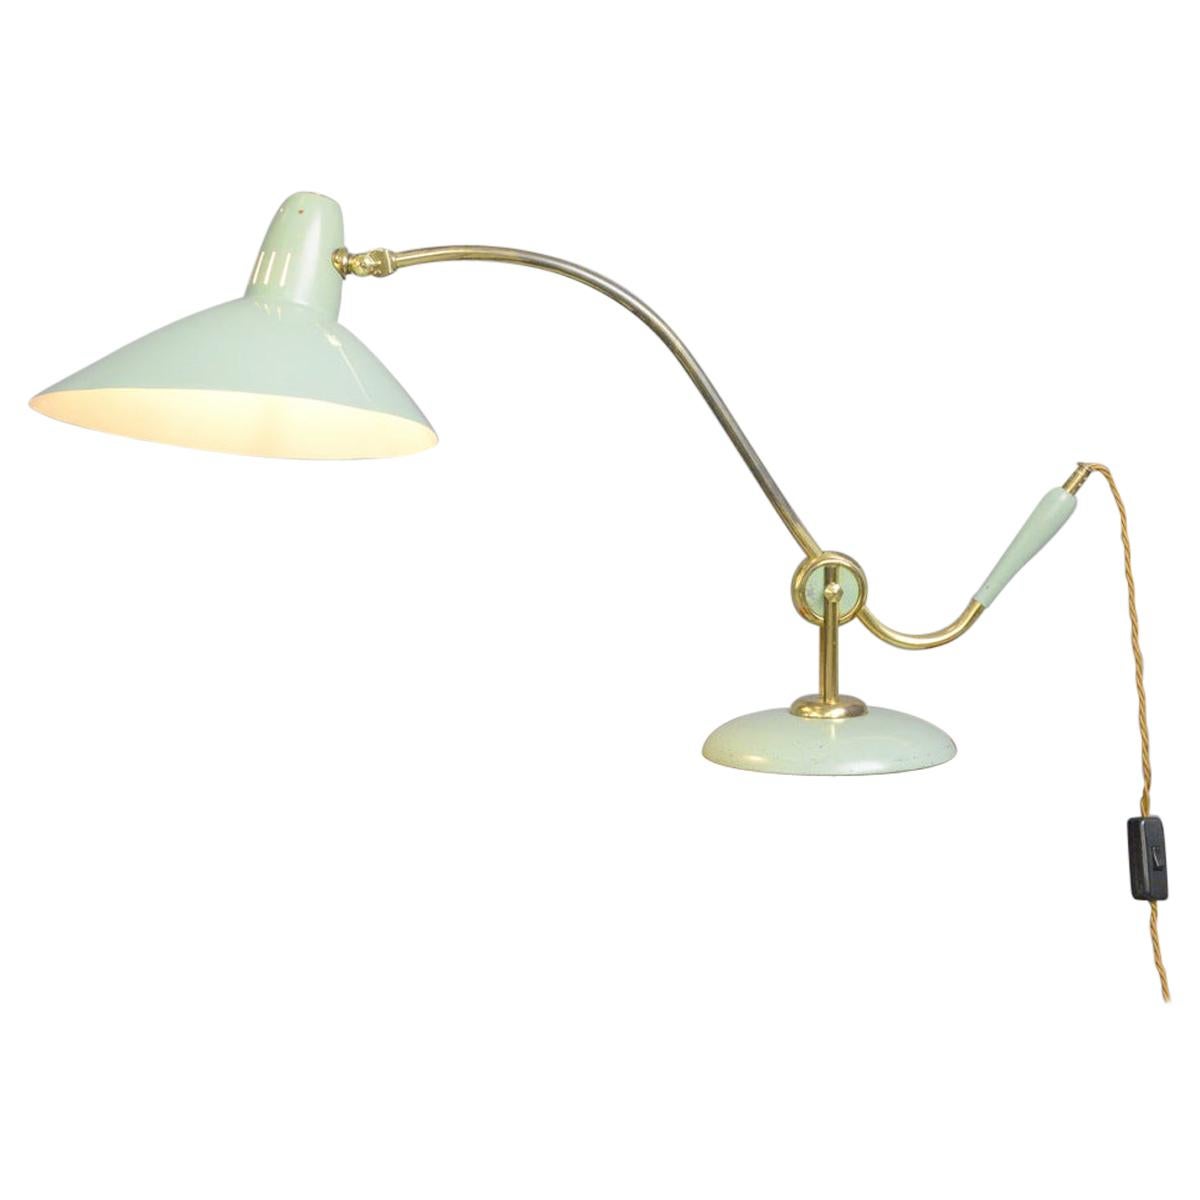 Midcentury Table Lamp by Helo, circa 1950s